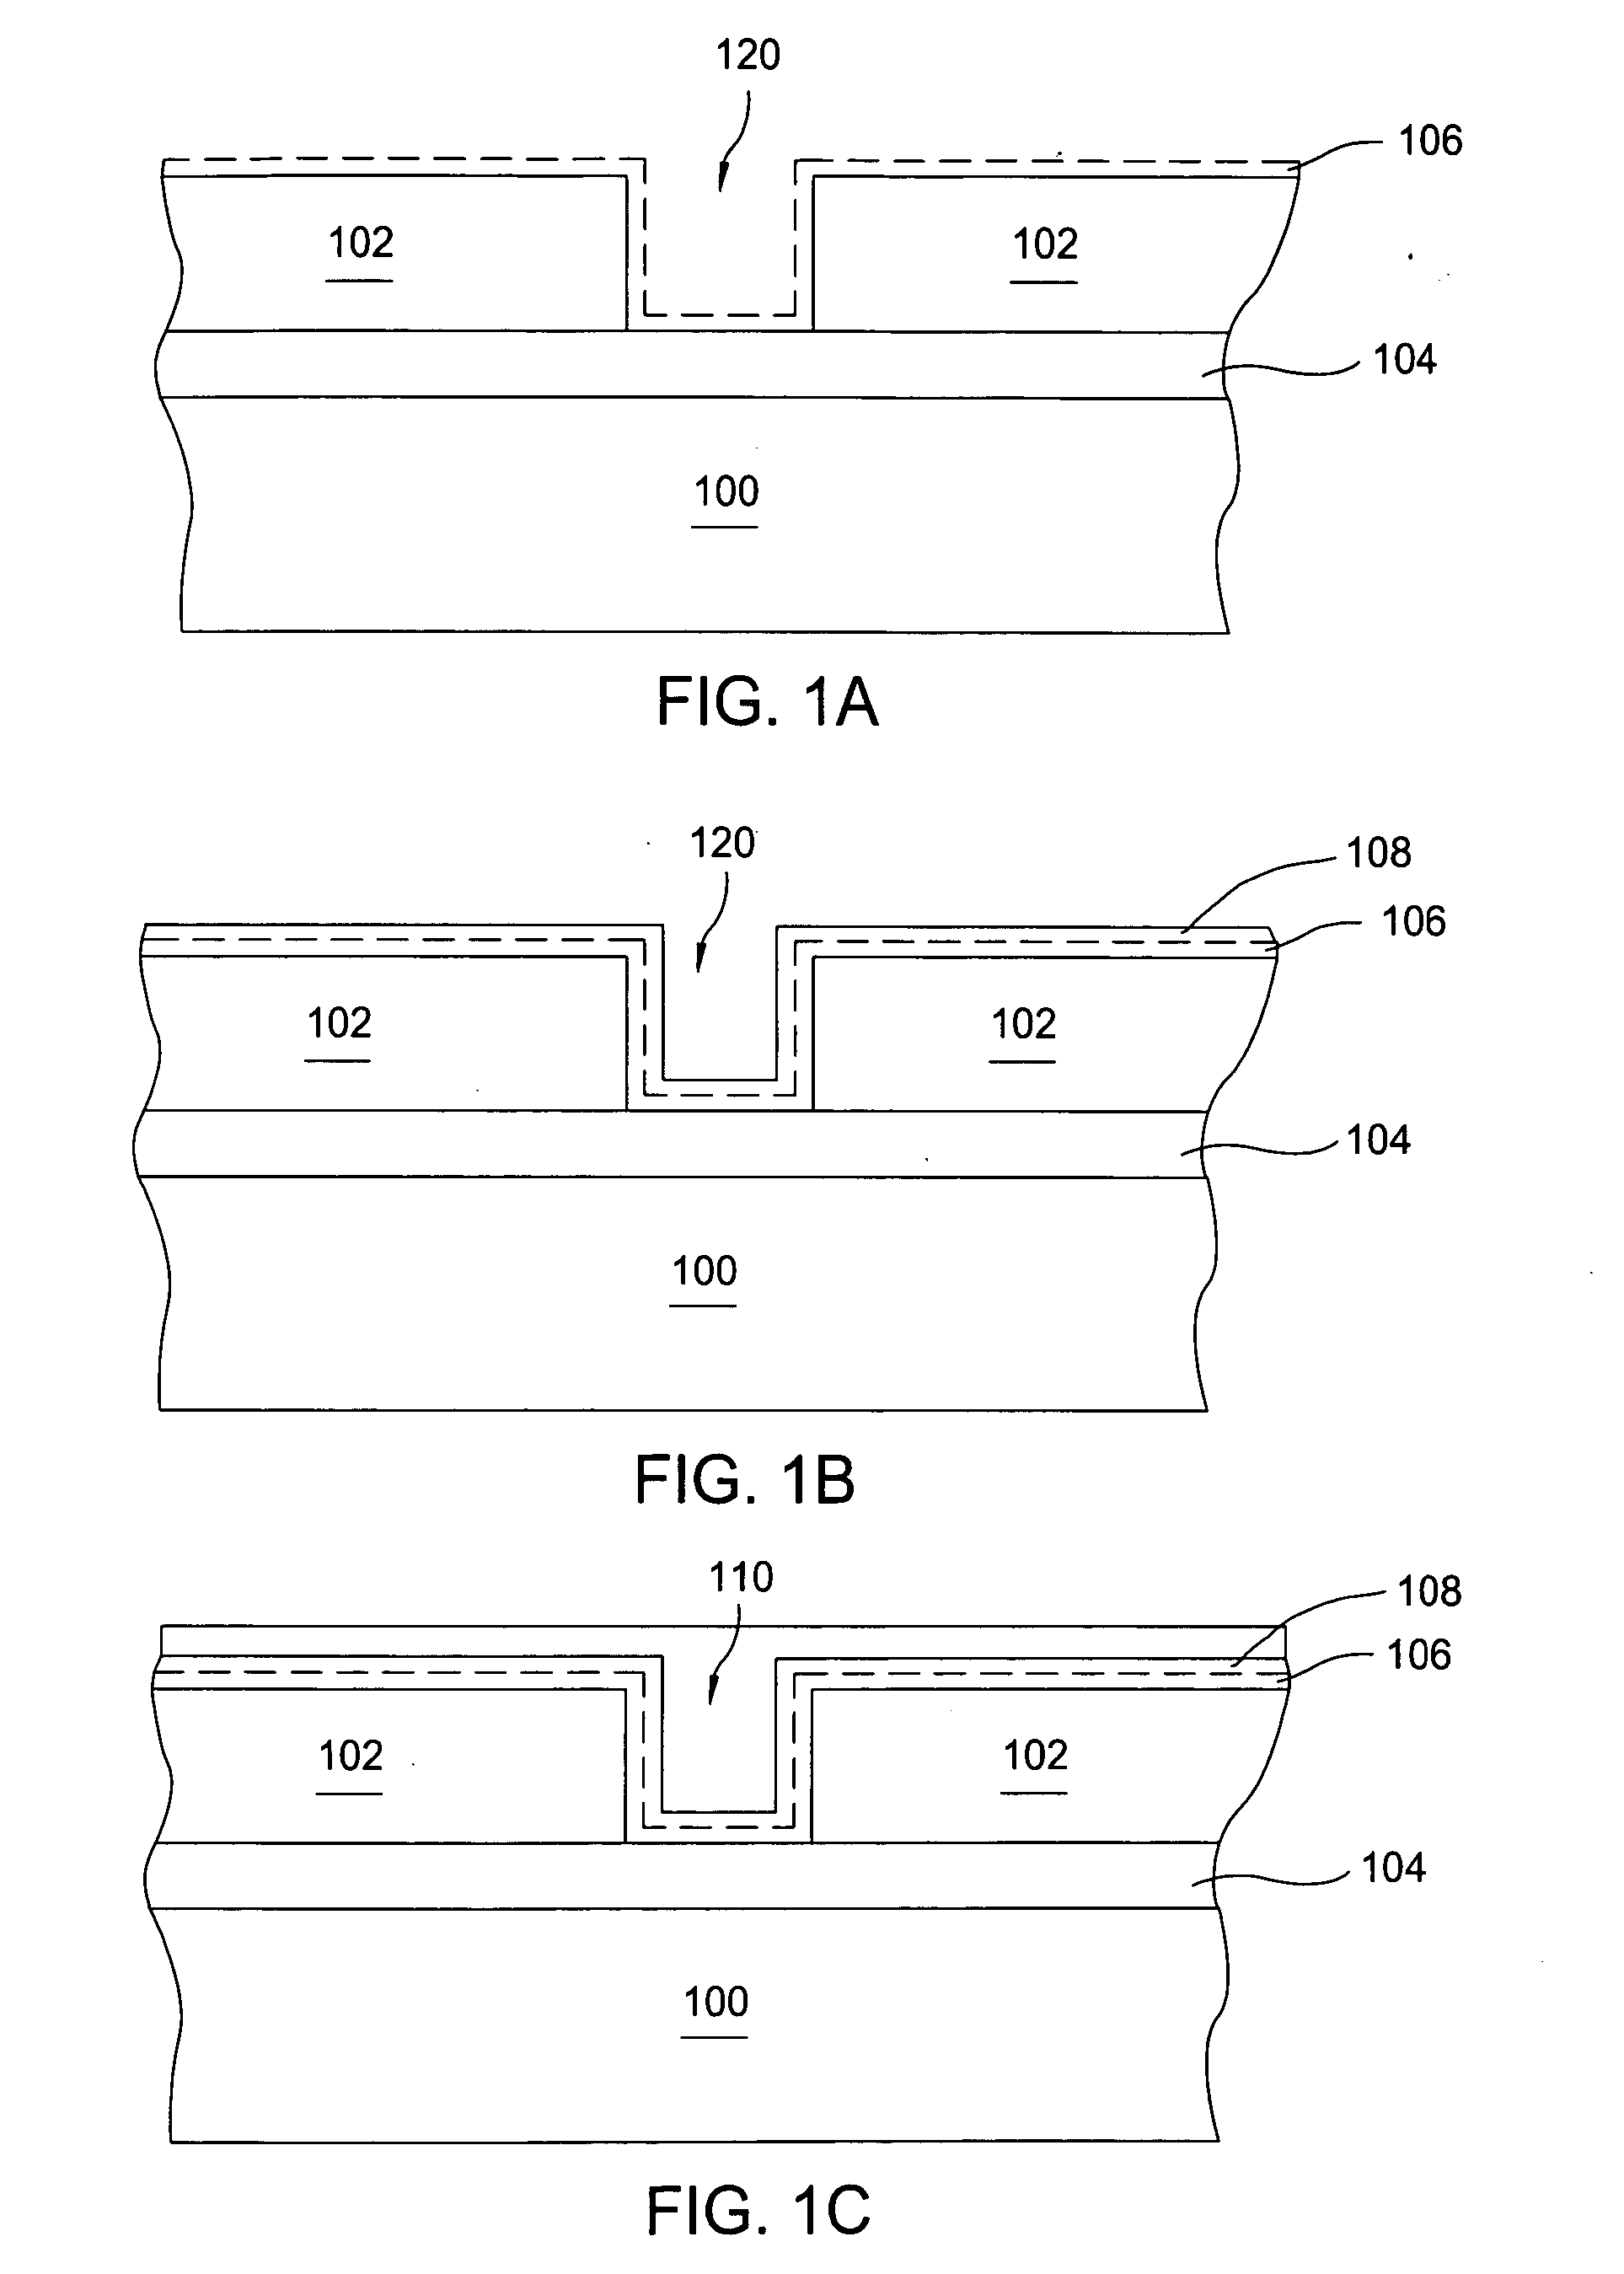 Method of barrier layer surface treatment to enable direct copper plating on barrier metal